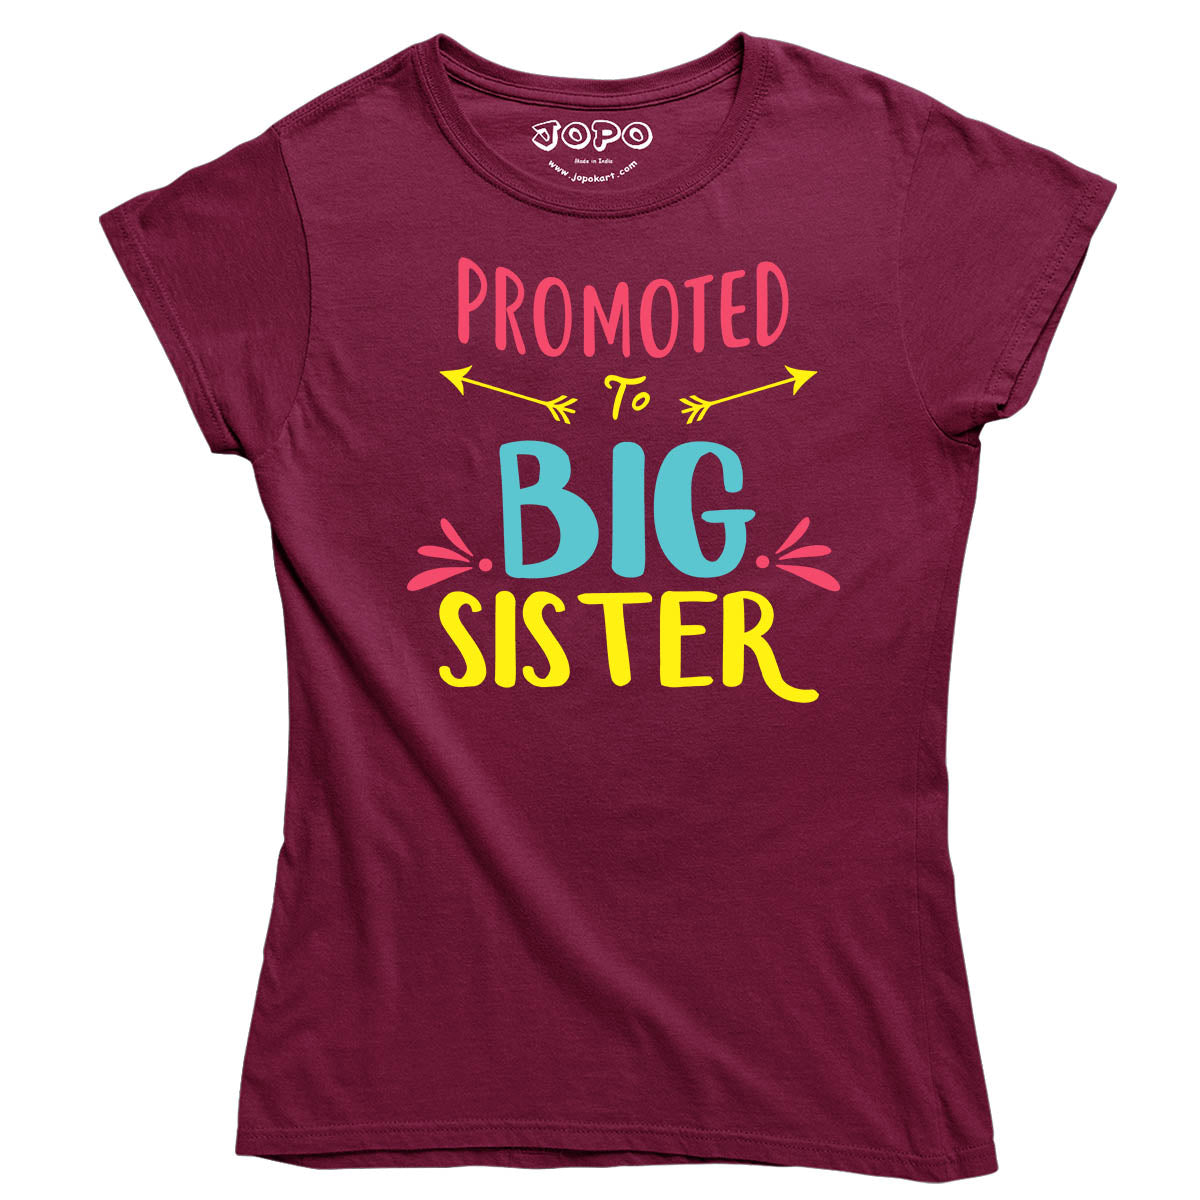 Promoted to big Sister maroon